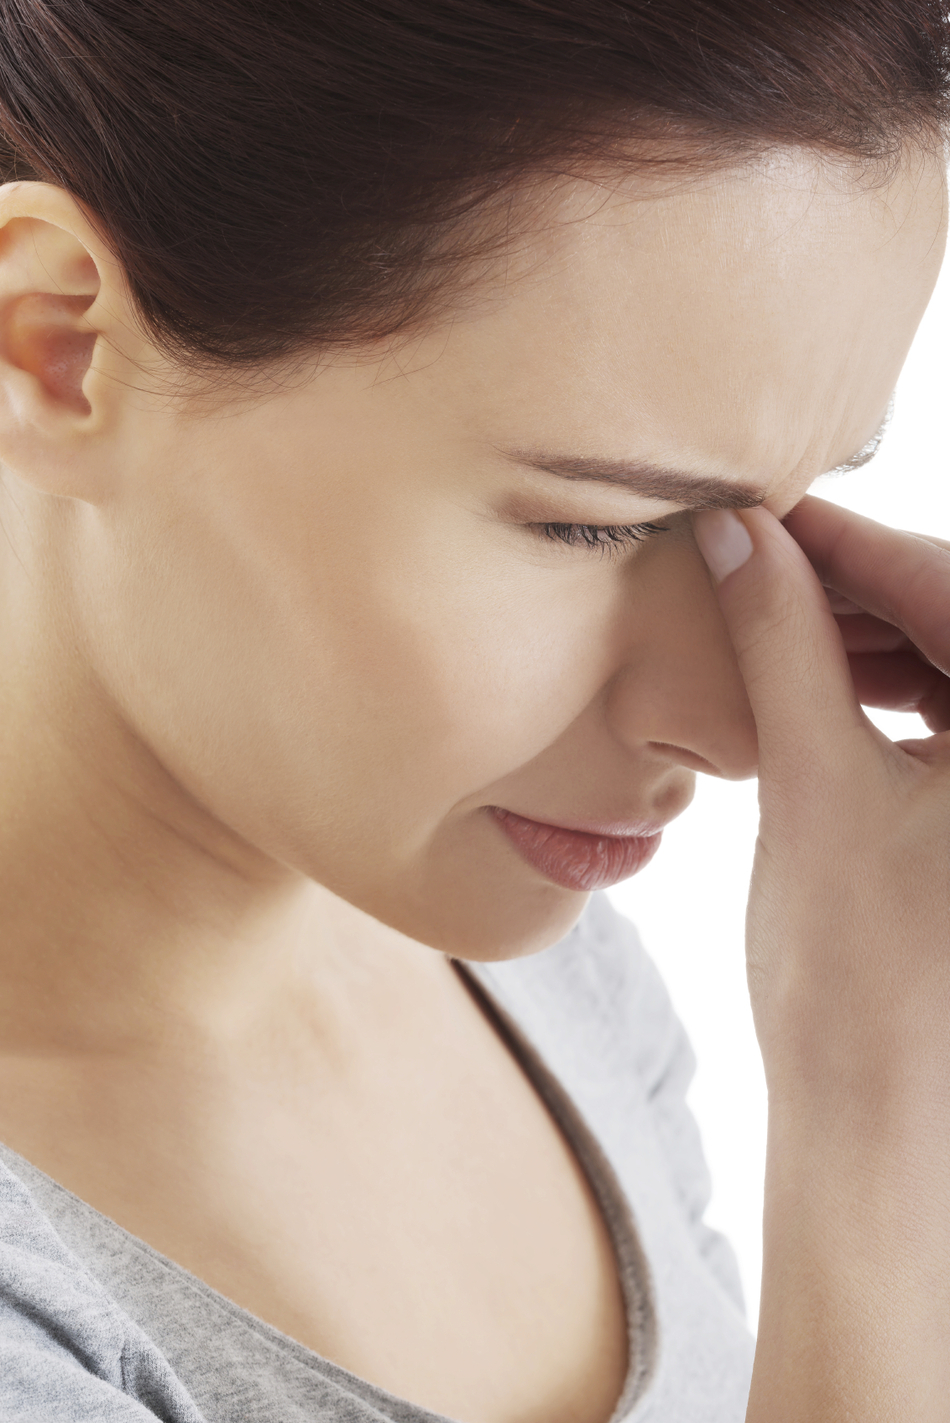 The Differences Between Allergic Rhinitis and Sinusitis